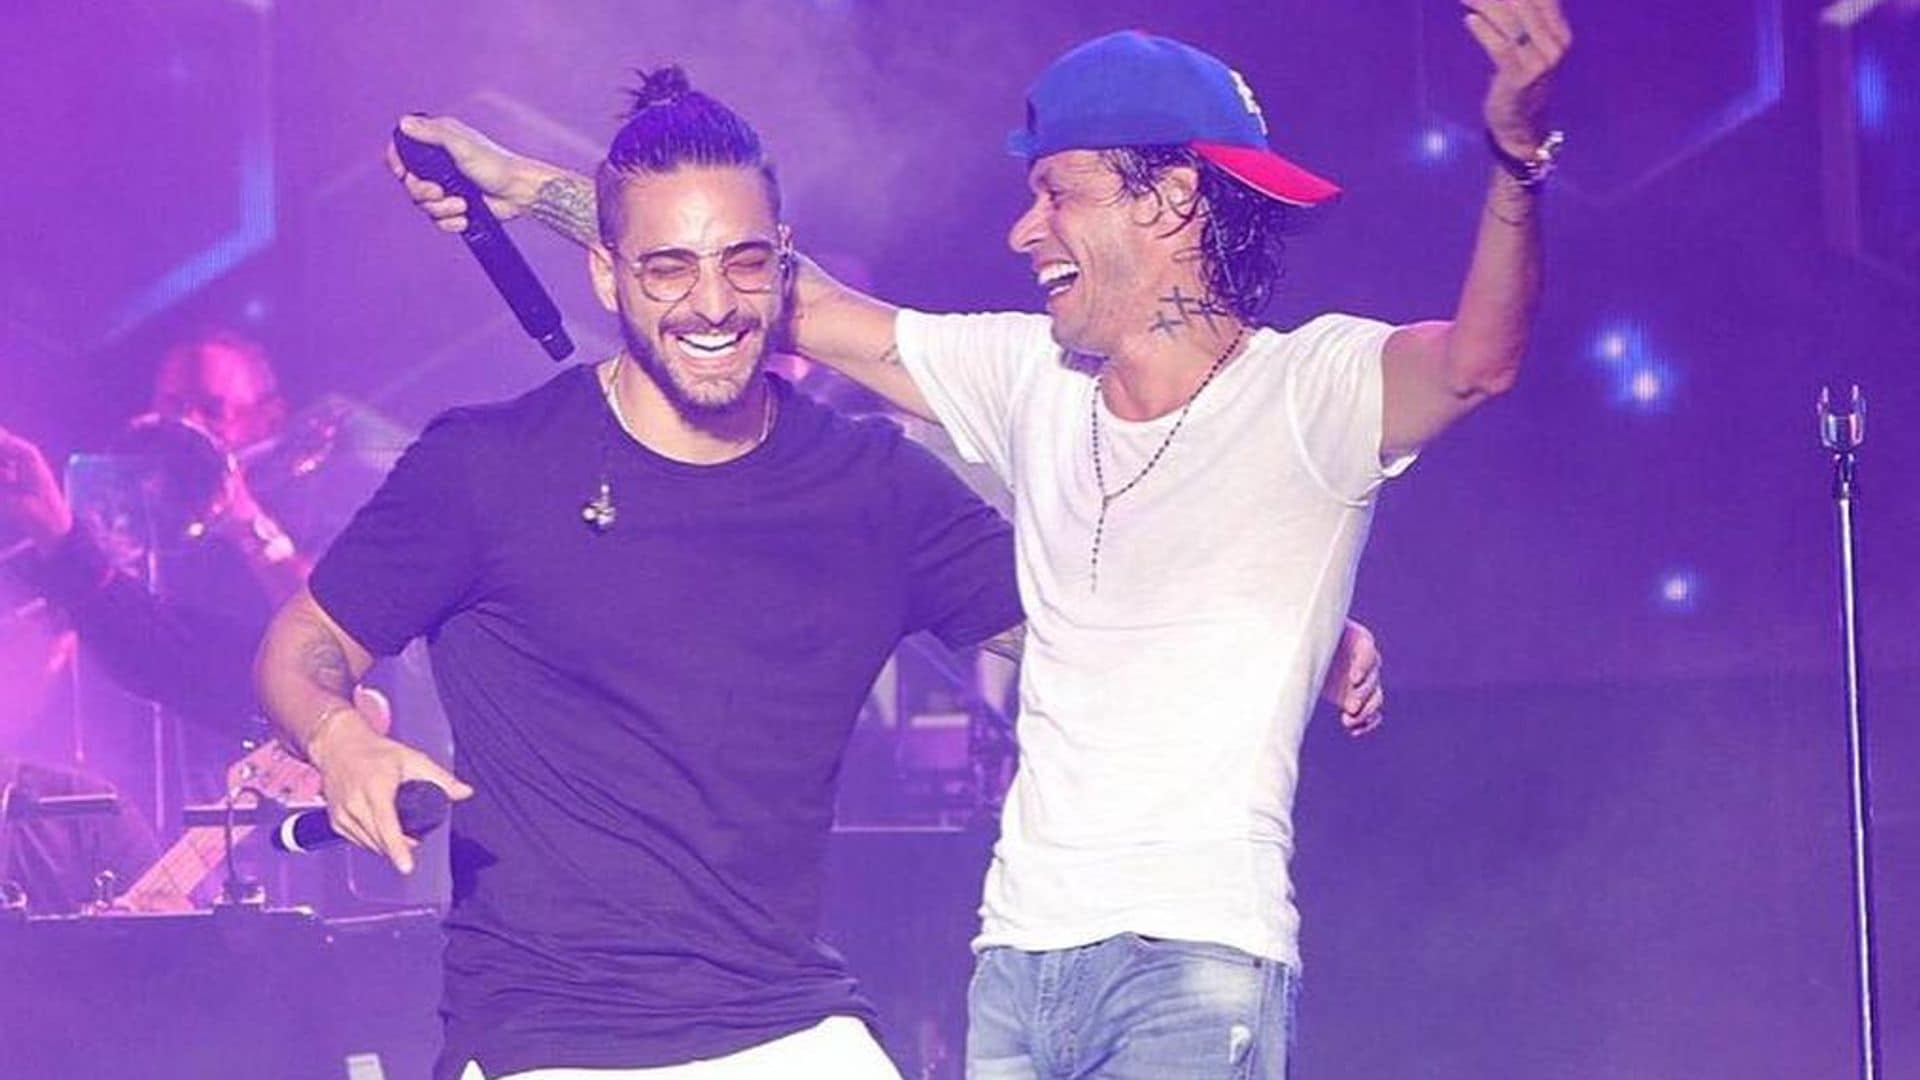 Get caught up with the Maluma-Marc Anthony bromance